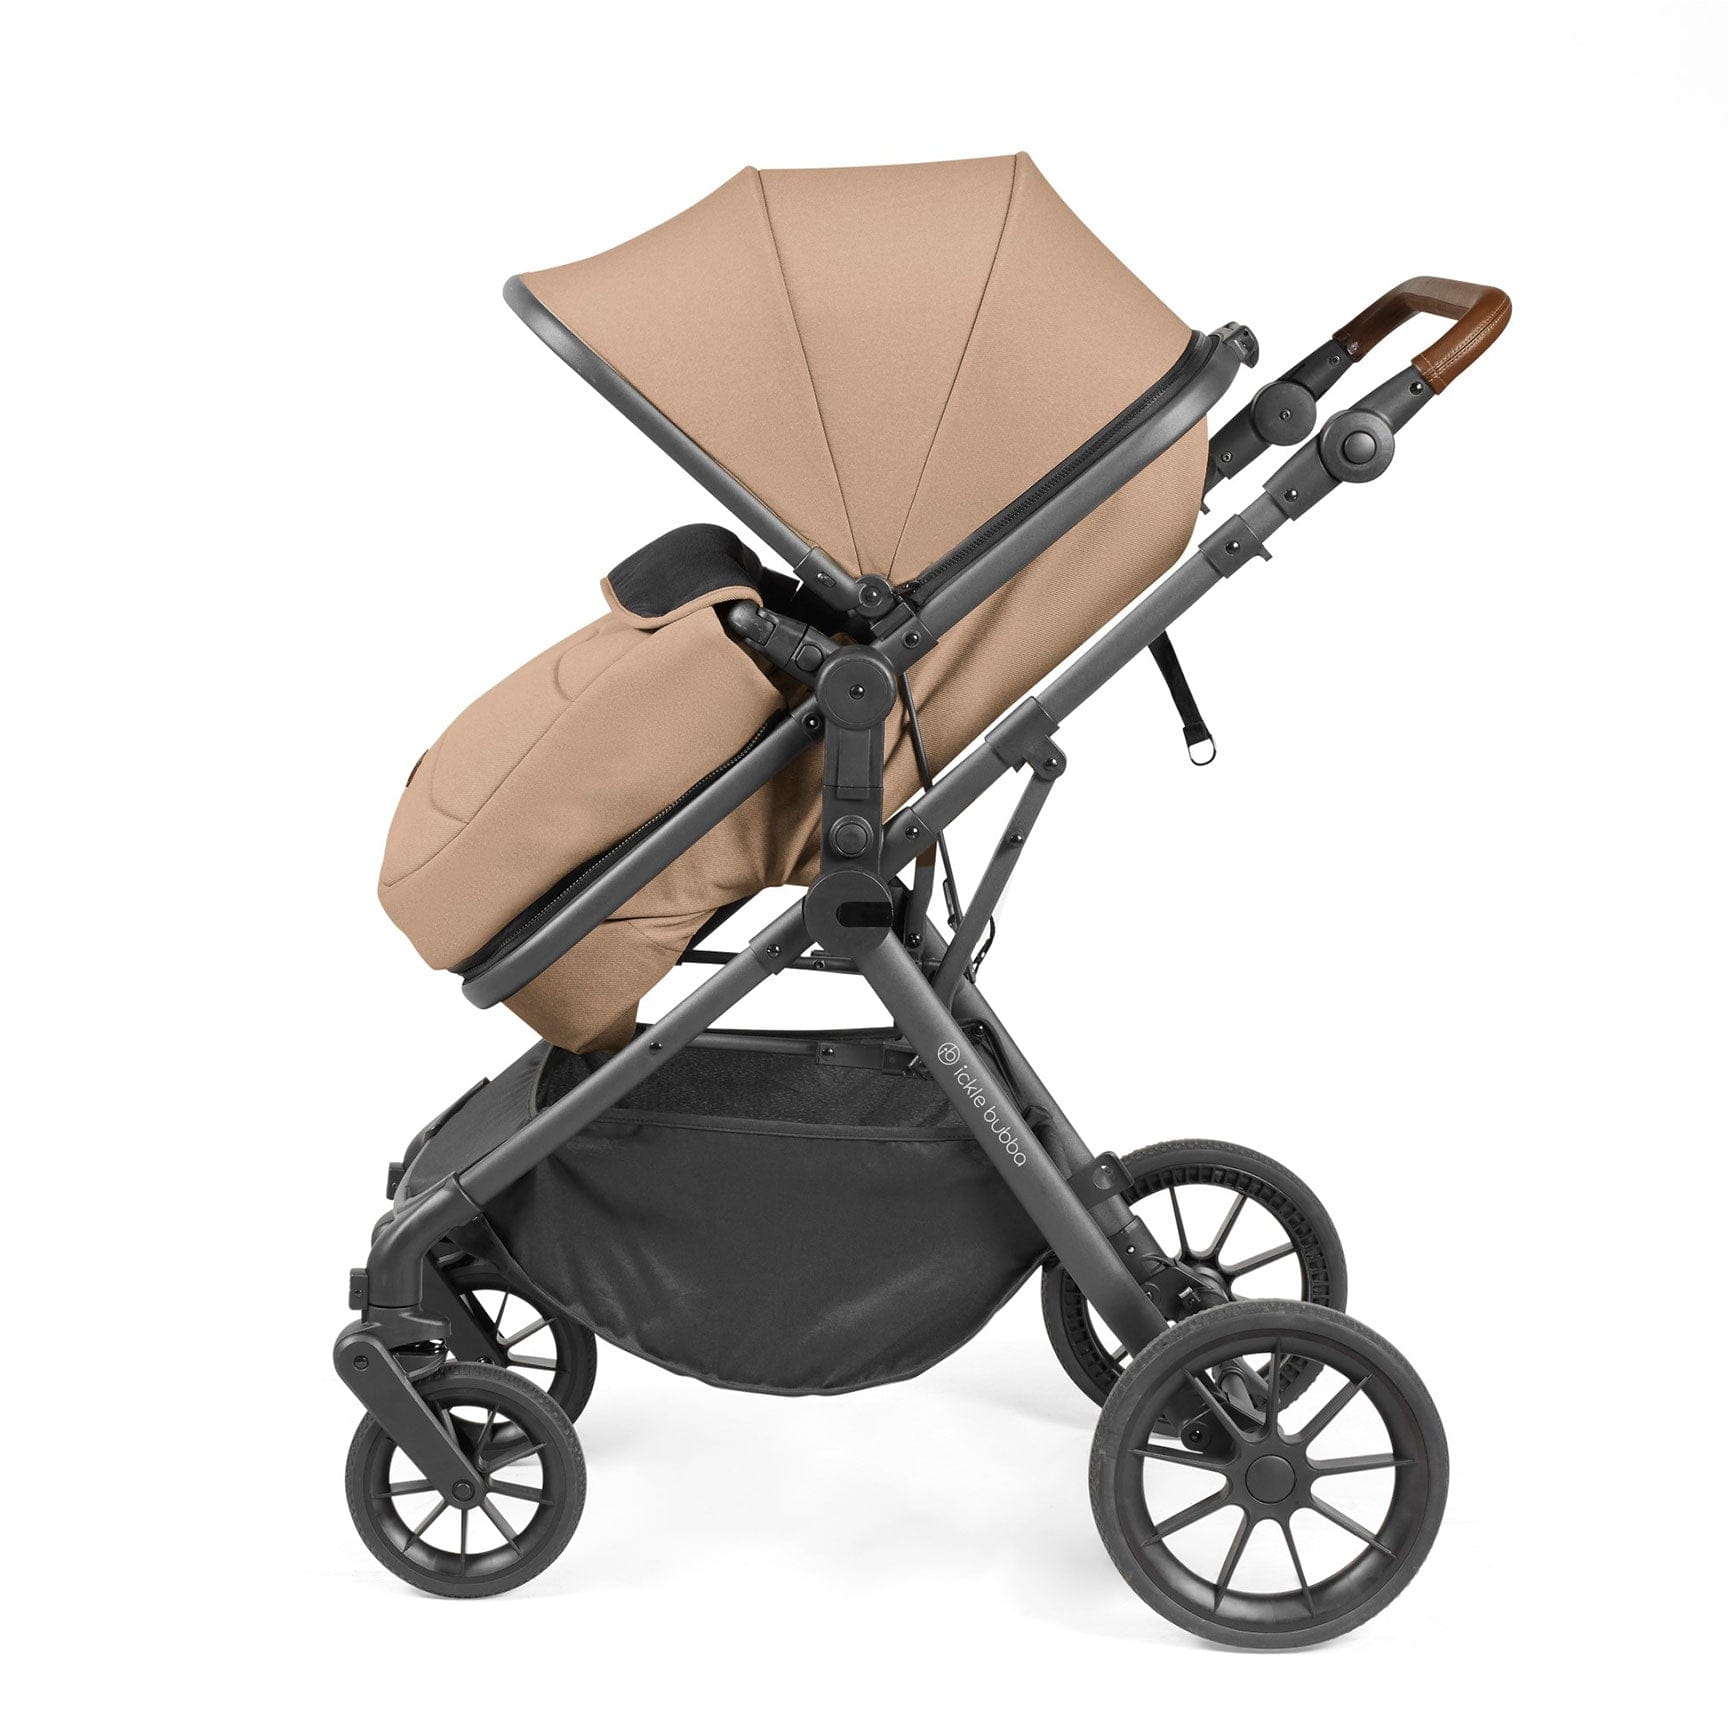 Ickle Bubba travel systems Ickle Bubba Cosmo All-in-One I-Size Travel System with Isofix Base - Desert/Graphite Grey 10-007-300-136